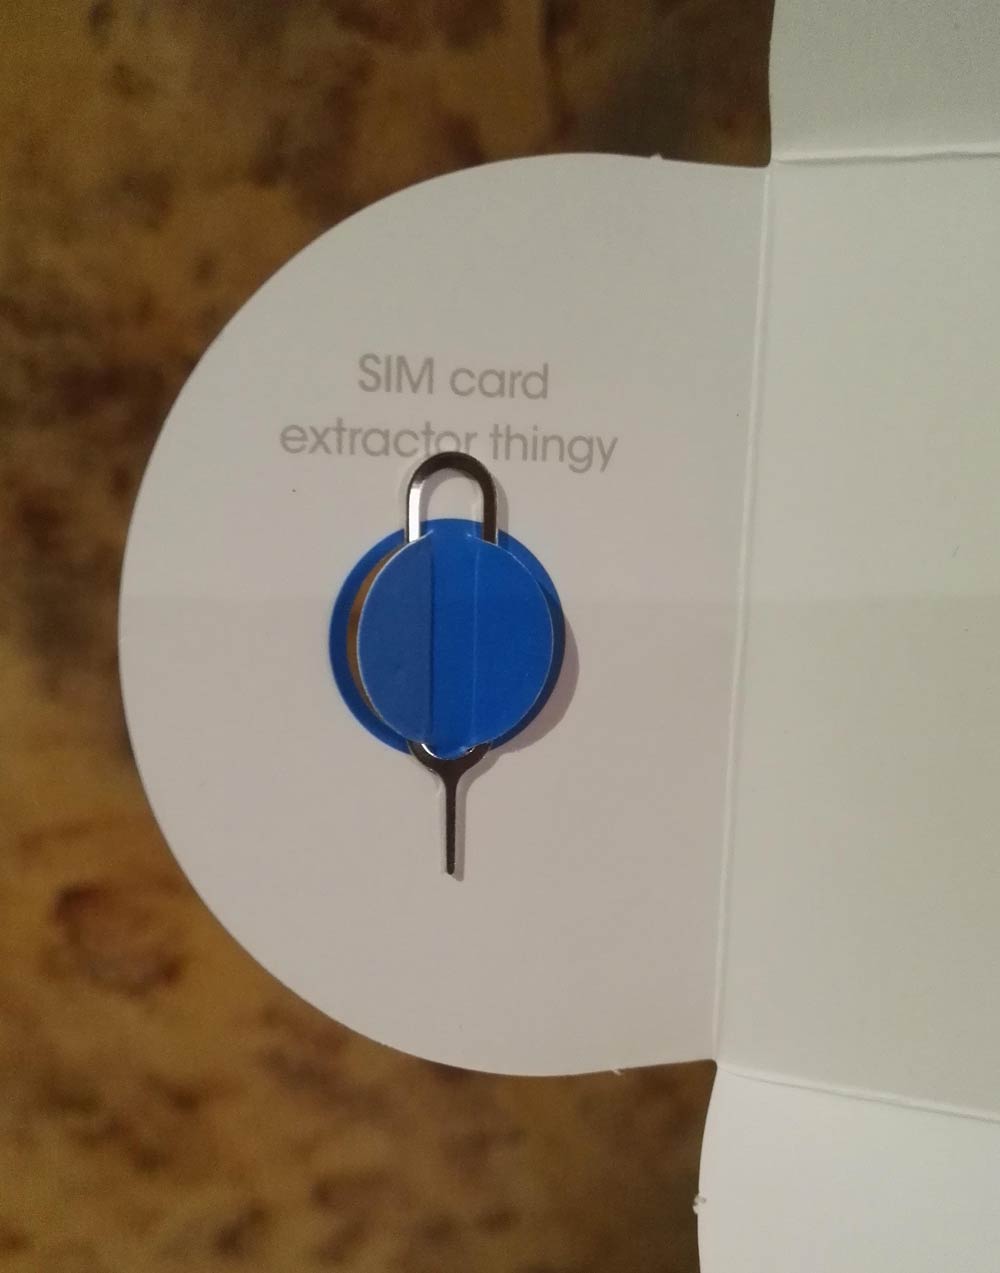 My new sim card got delivered. At least now I know what this is called